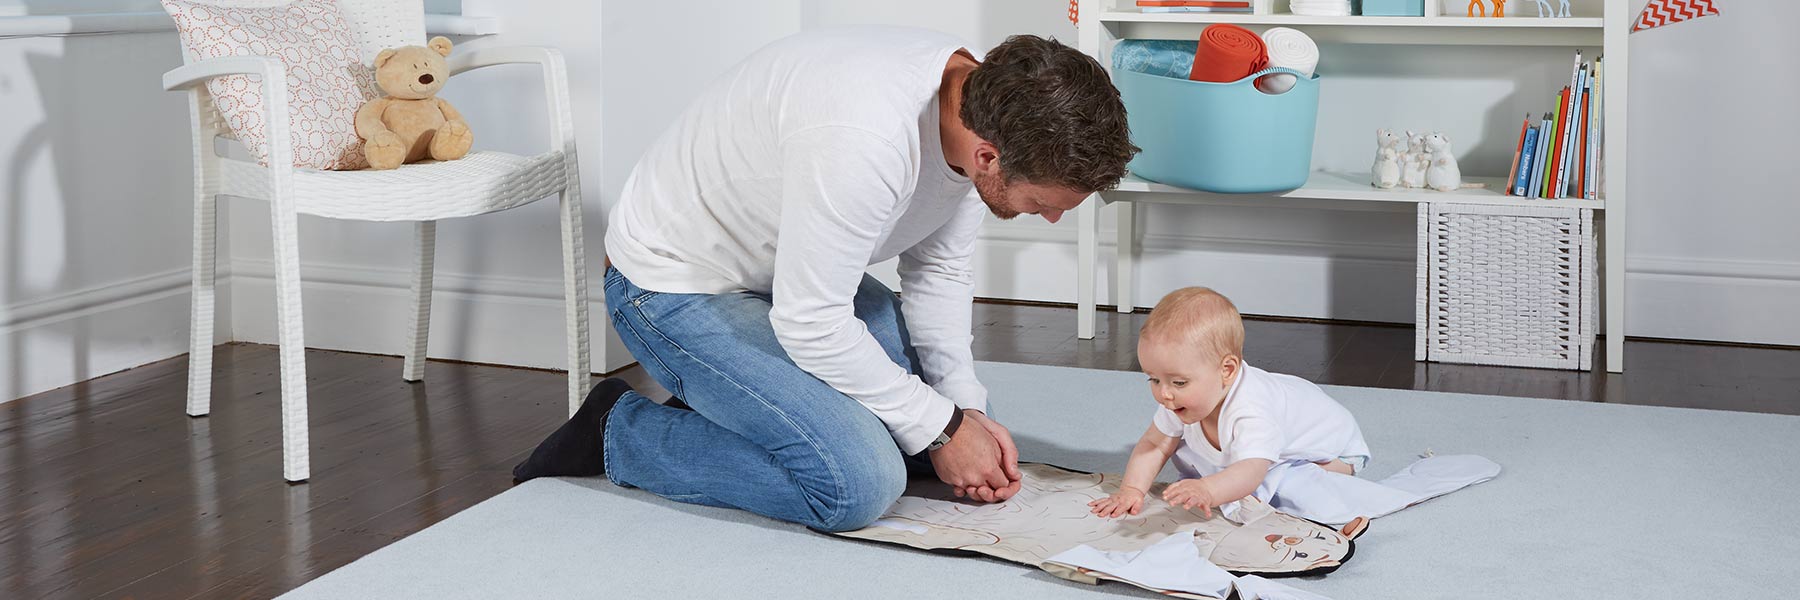 Dad changes baby diaper with The Wriggler portable changing pad